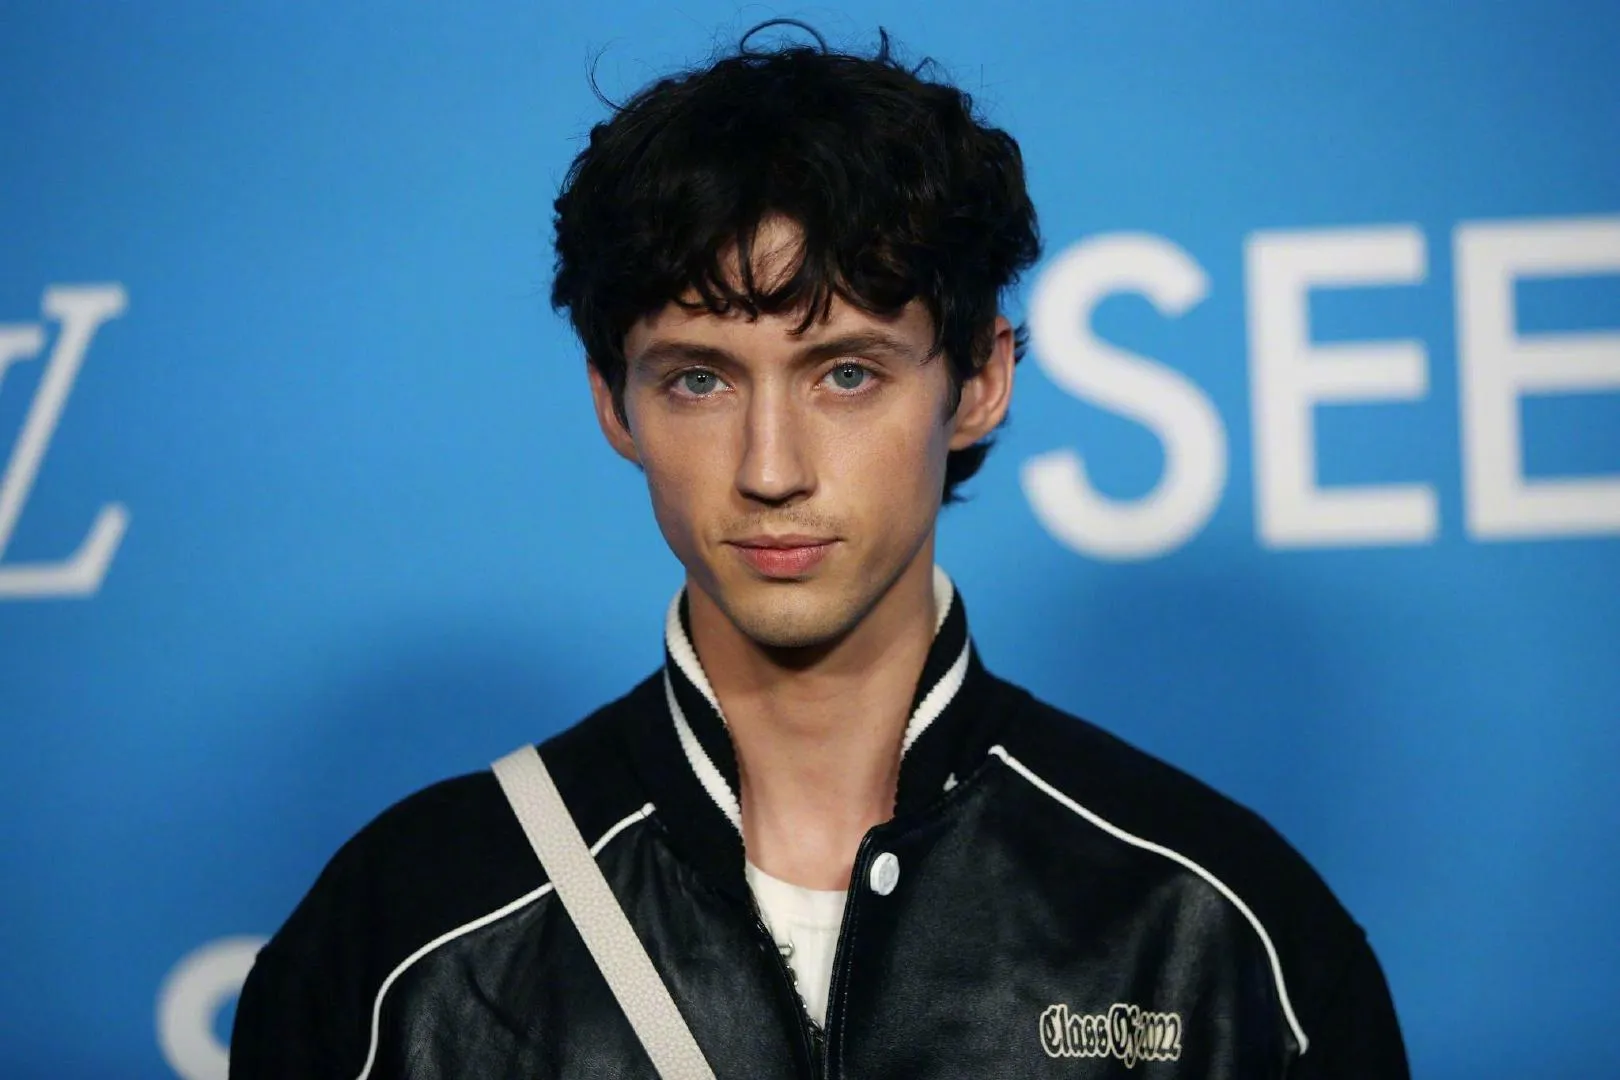 Troye Sivan debuts at the brand exhibition | FMV6